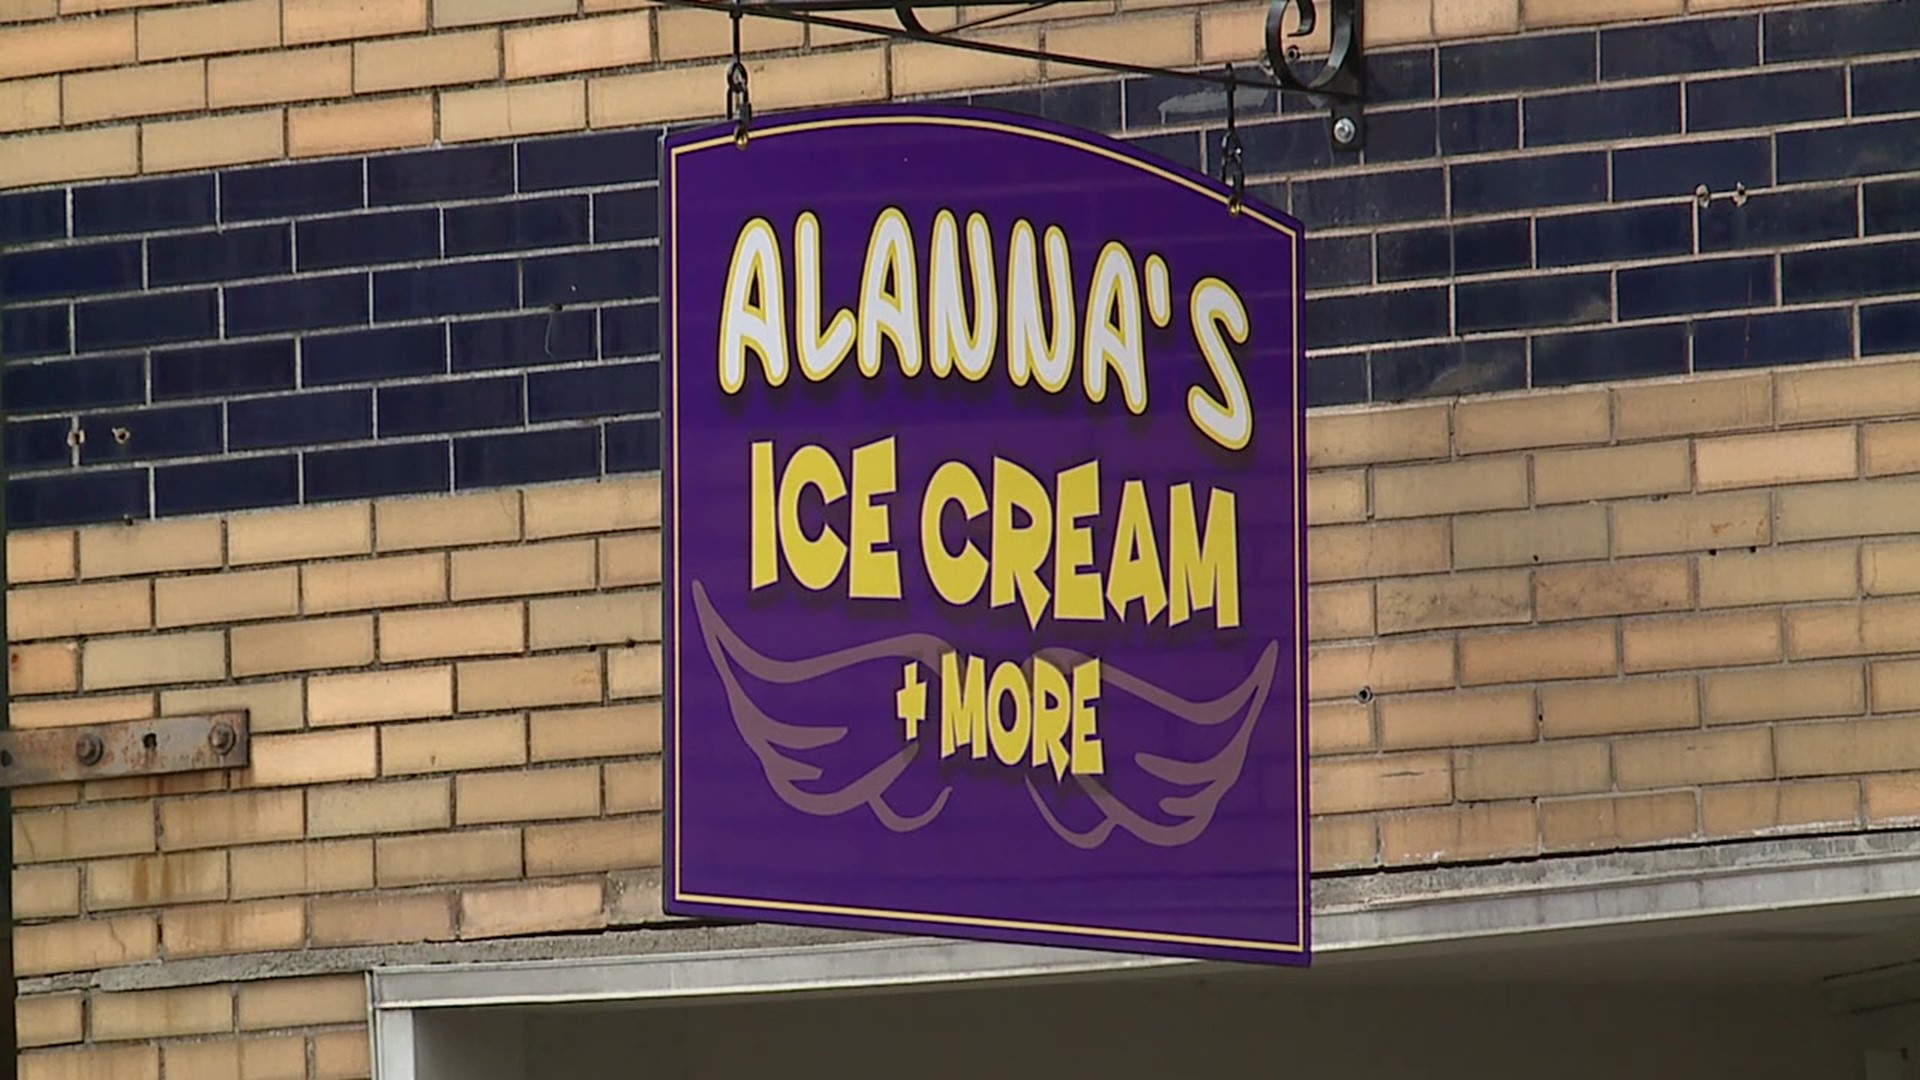 Alanna Neidig died of a heart condition at just 28 years of age. Alanna's Ice Cream and More is dedicated to her memory.